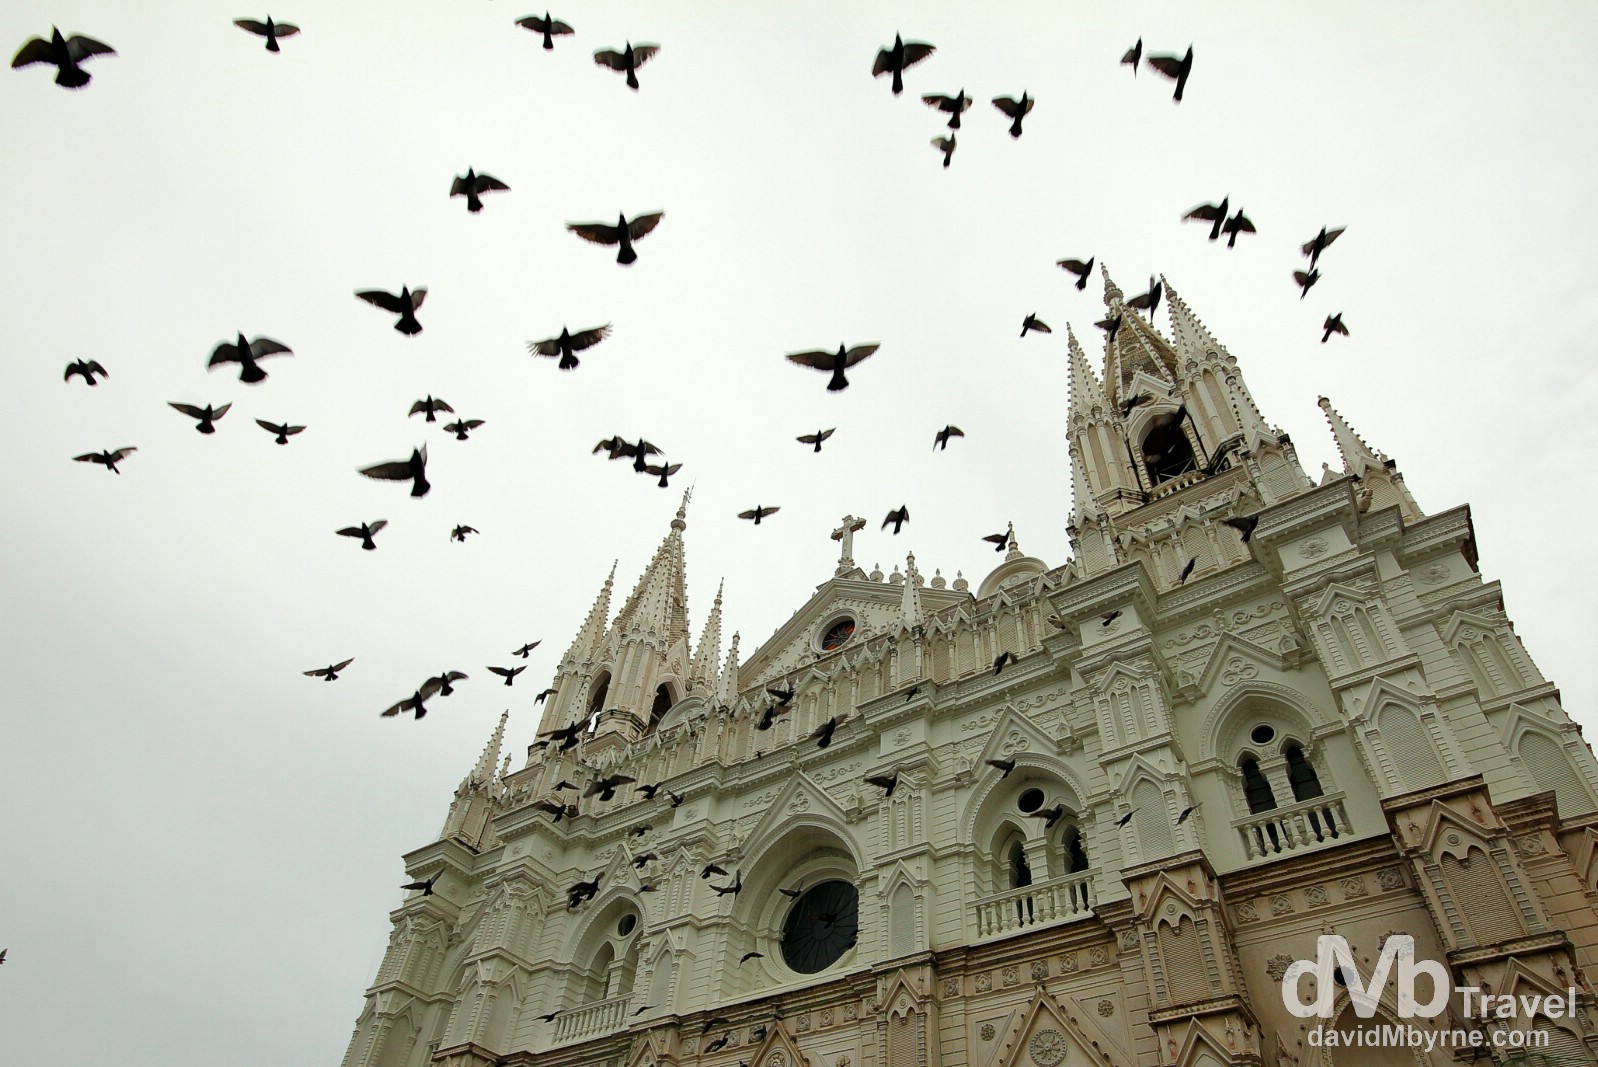 Pigeons flying in in front of Santa Ana's neo-Gothic Cathedral, Santa Ana, Western El Salvador. May 27th 2013.